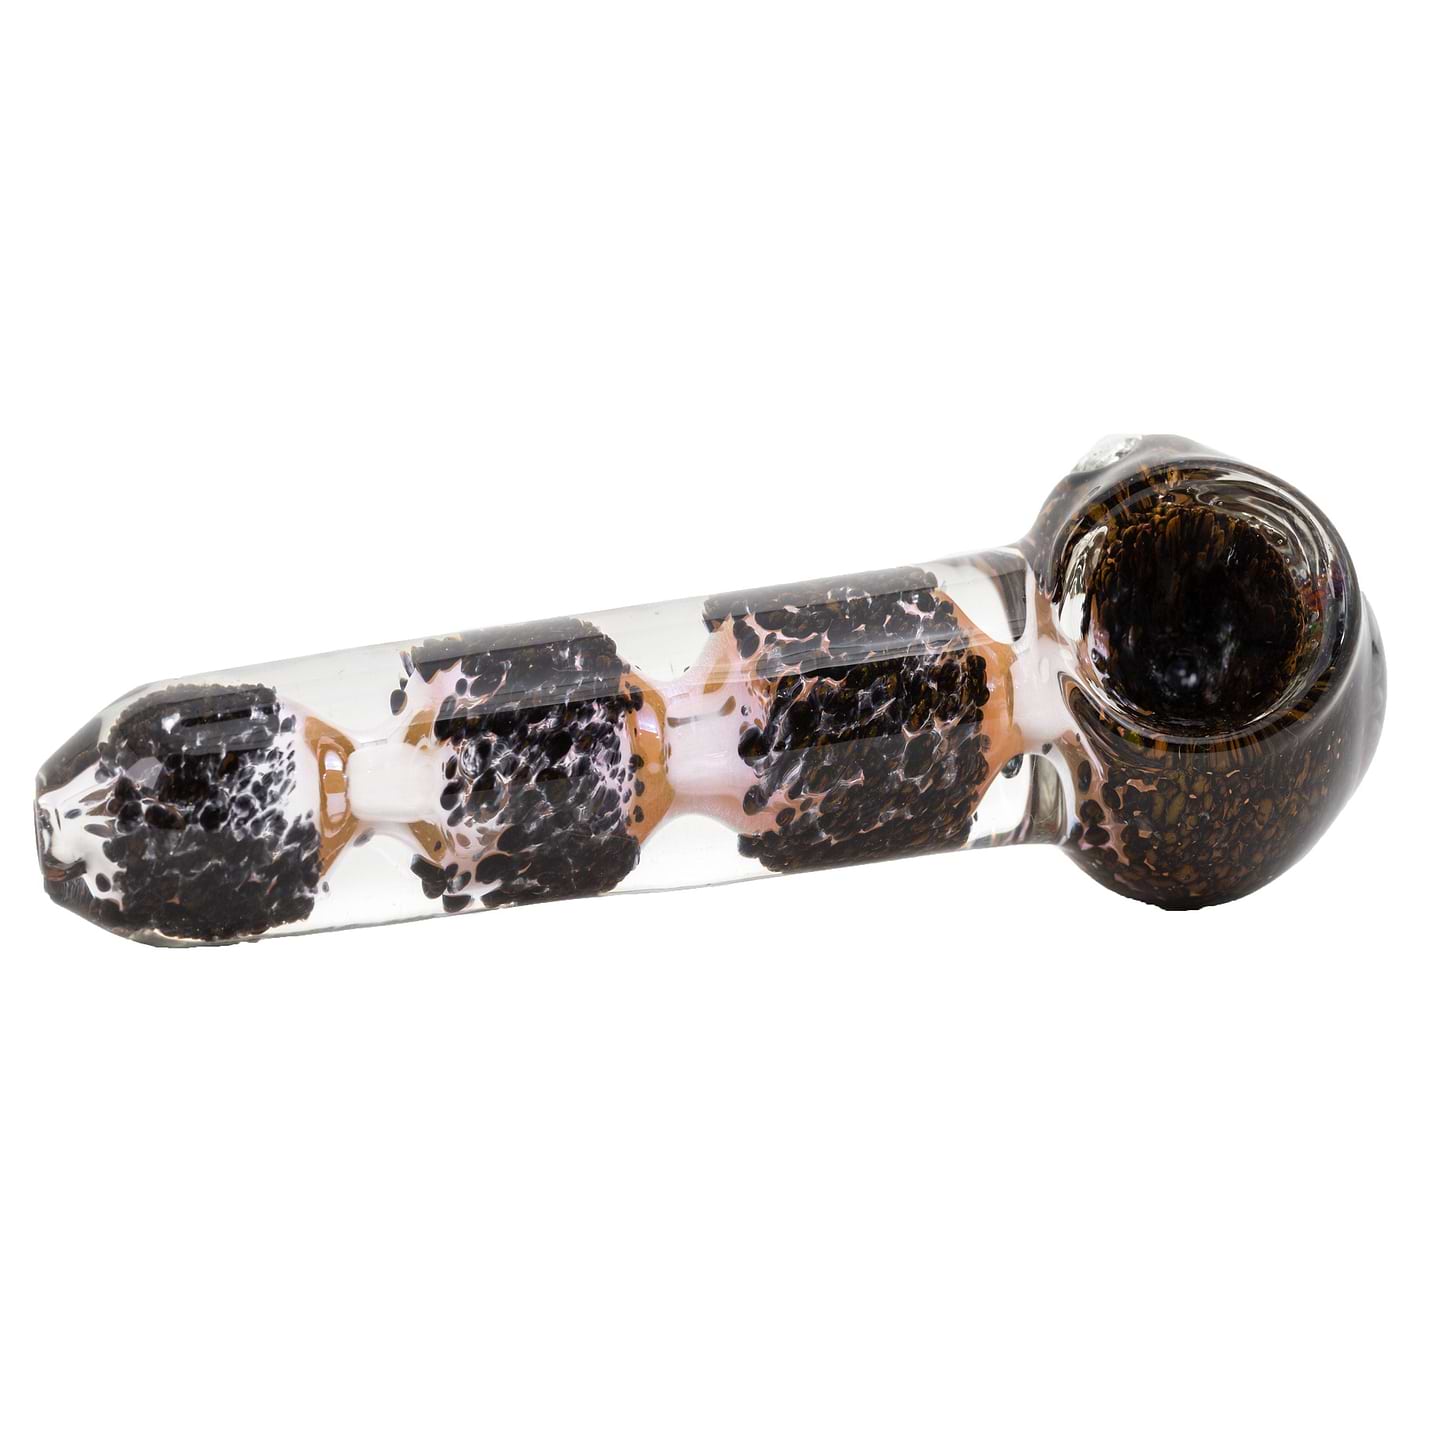 5.5-inch glass spoon hand pipe chambered smoking device with an atomic particles and uclear explosion design